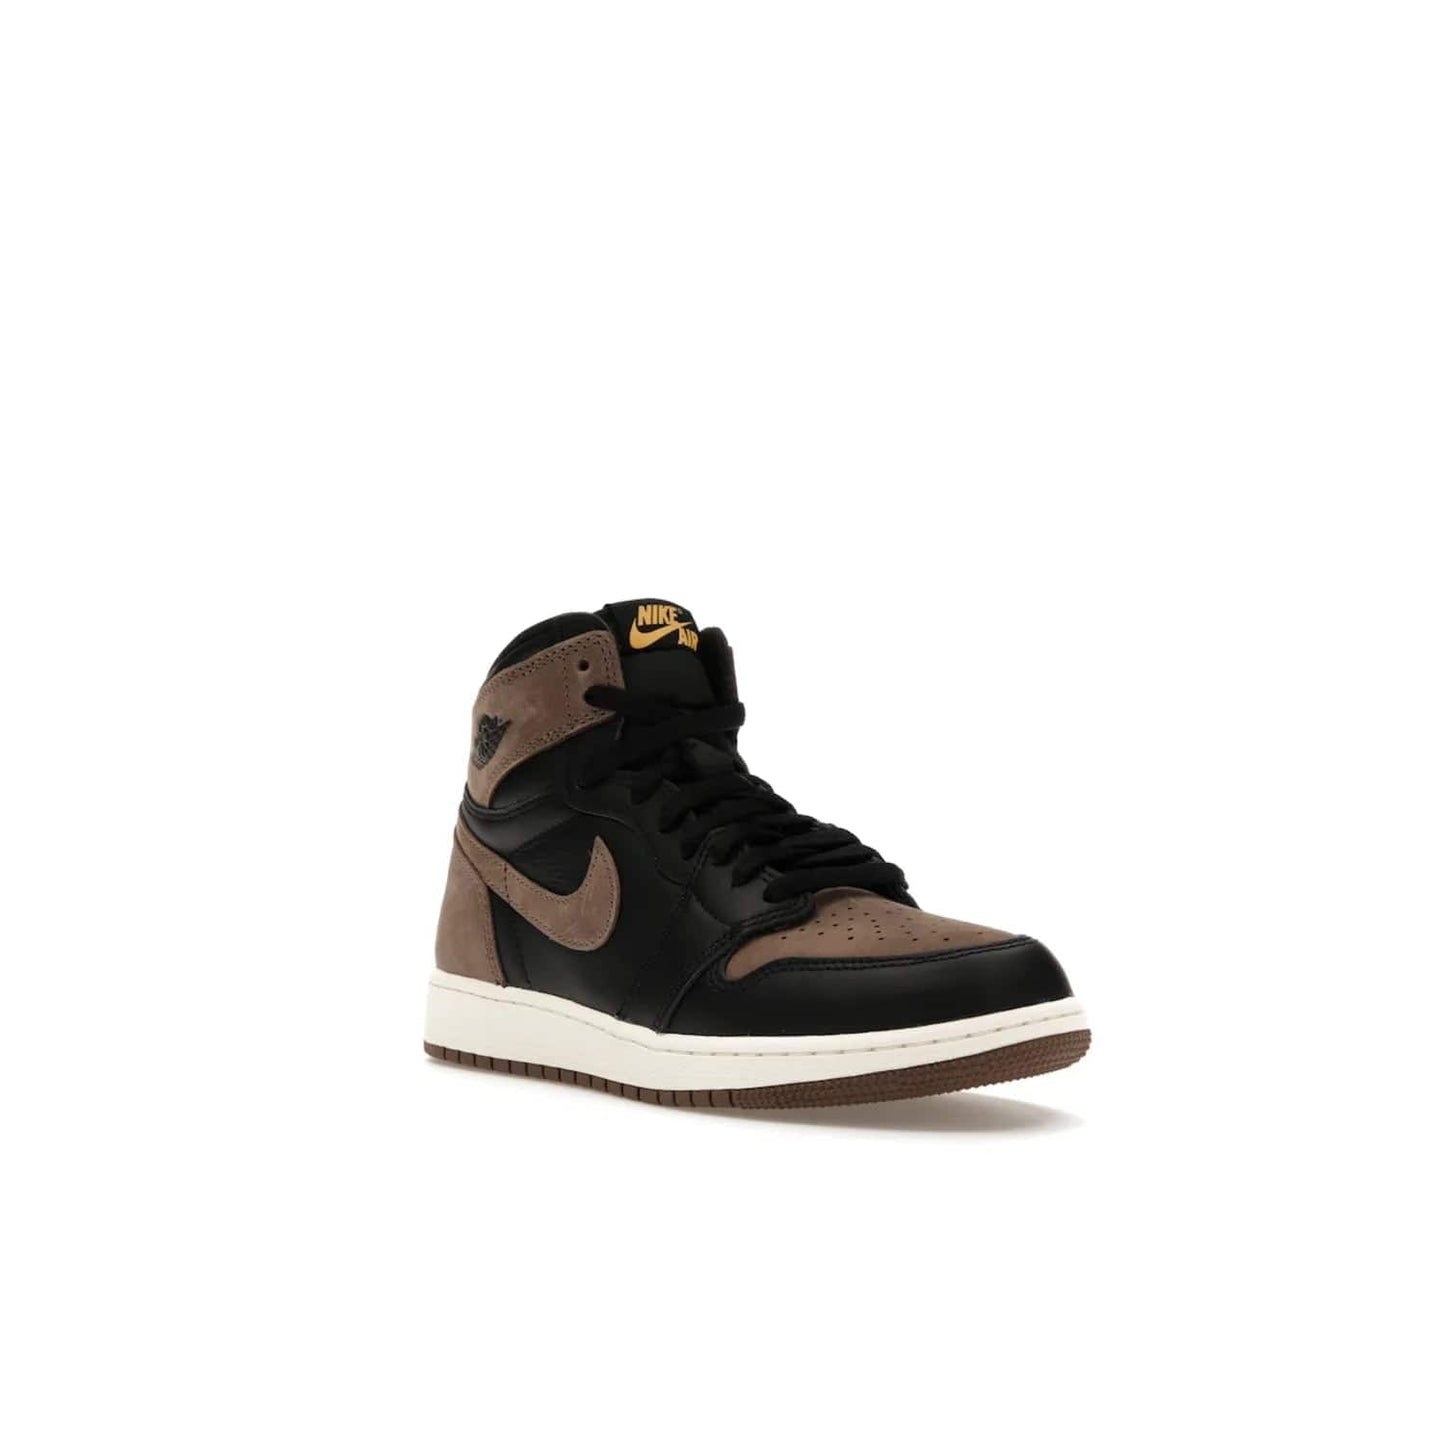 Jordan 1 Retro High OG Palomino (GS) - Image 6 - Only at www.BallersClubKickz.com - Introducing the luxurious Jordan 1 Retro High OG Palomino (GS). Featuring black leather with metallic gold and palomino accents, this sneaker is perfect for any occasion. Grab yours when they release on September 2nd of 2023.